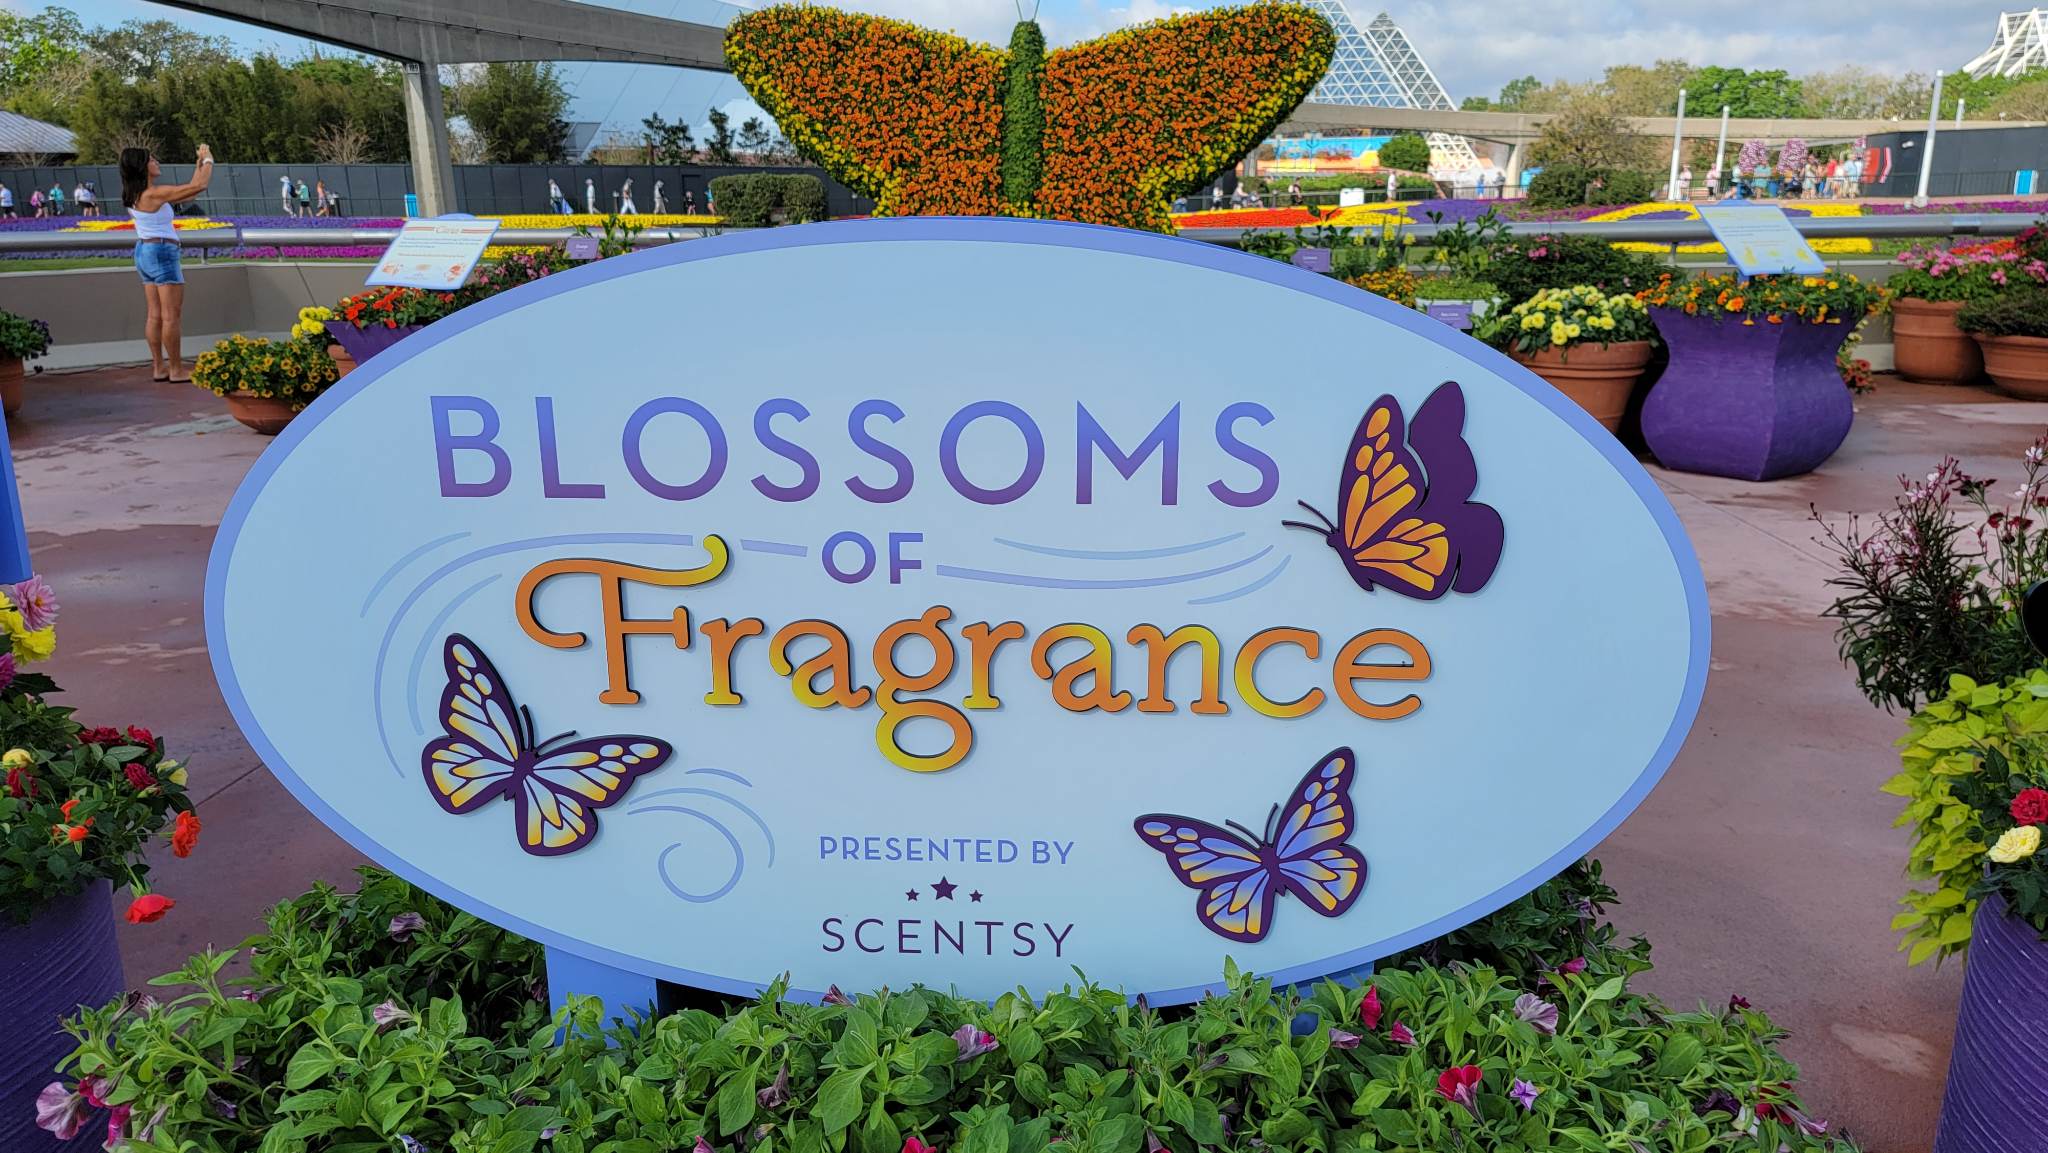 Photos: Blossoms of Fragrance from Scentsy returns to the 2023 EPCOT International Flower & Garden Festival